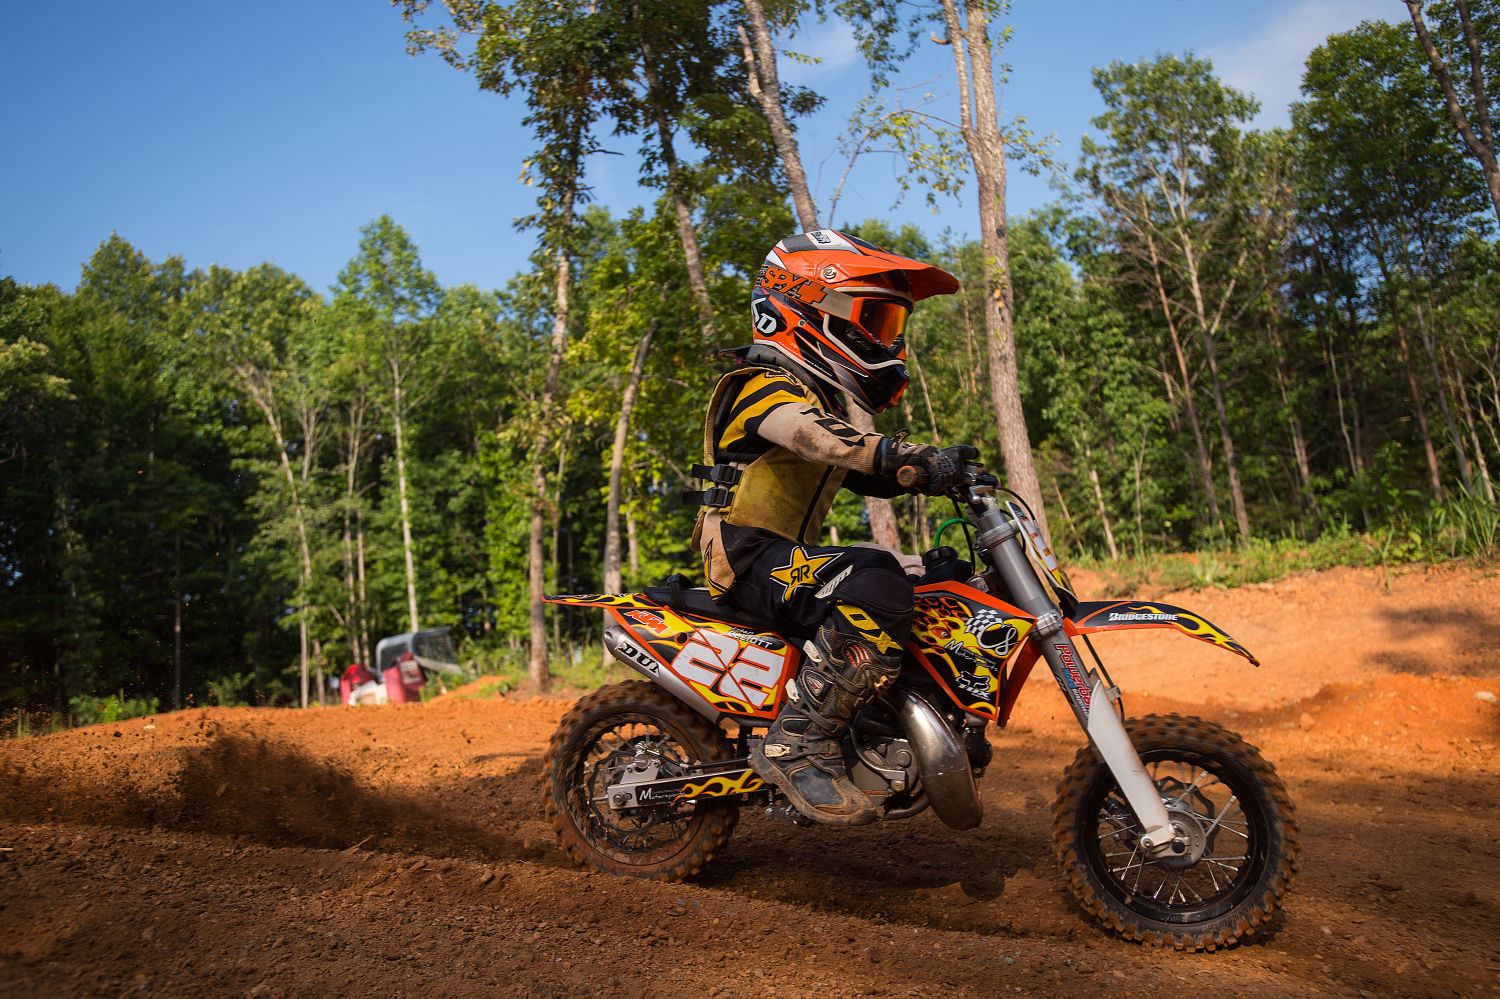 6-year-old hopes to win motocross trophy